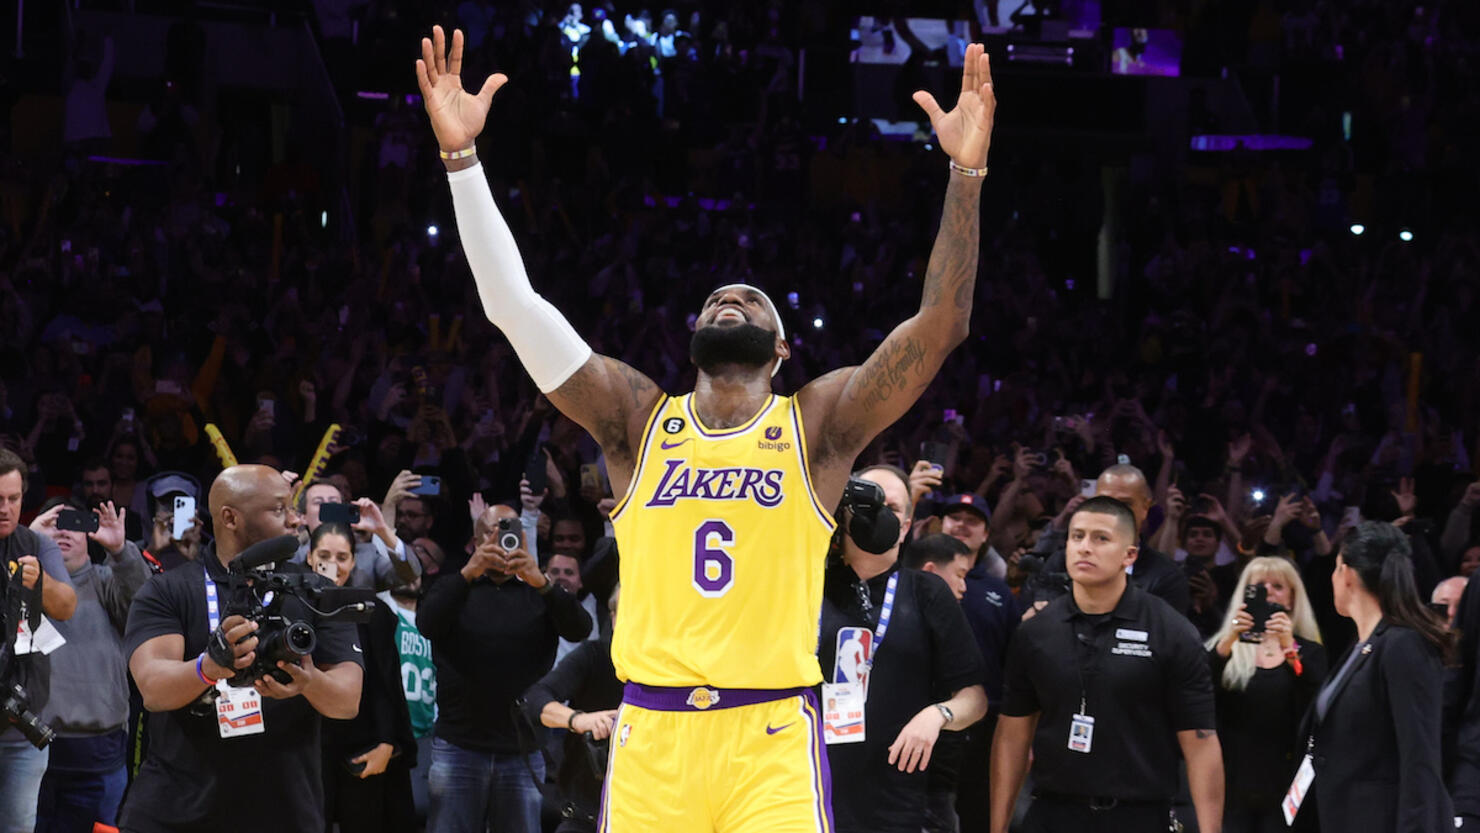 Lakers News: Game-Worn LeBron James Heat Finals Jersey Sells For Millions -  All Lakers